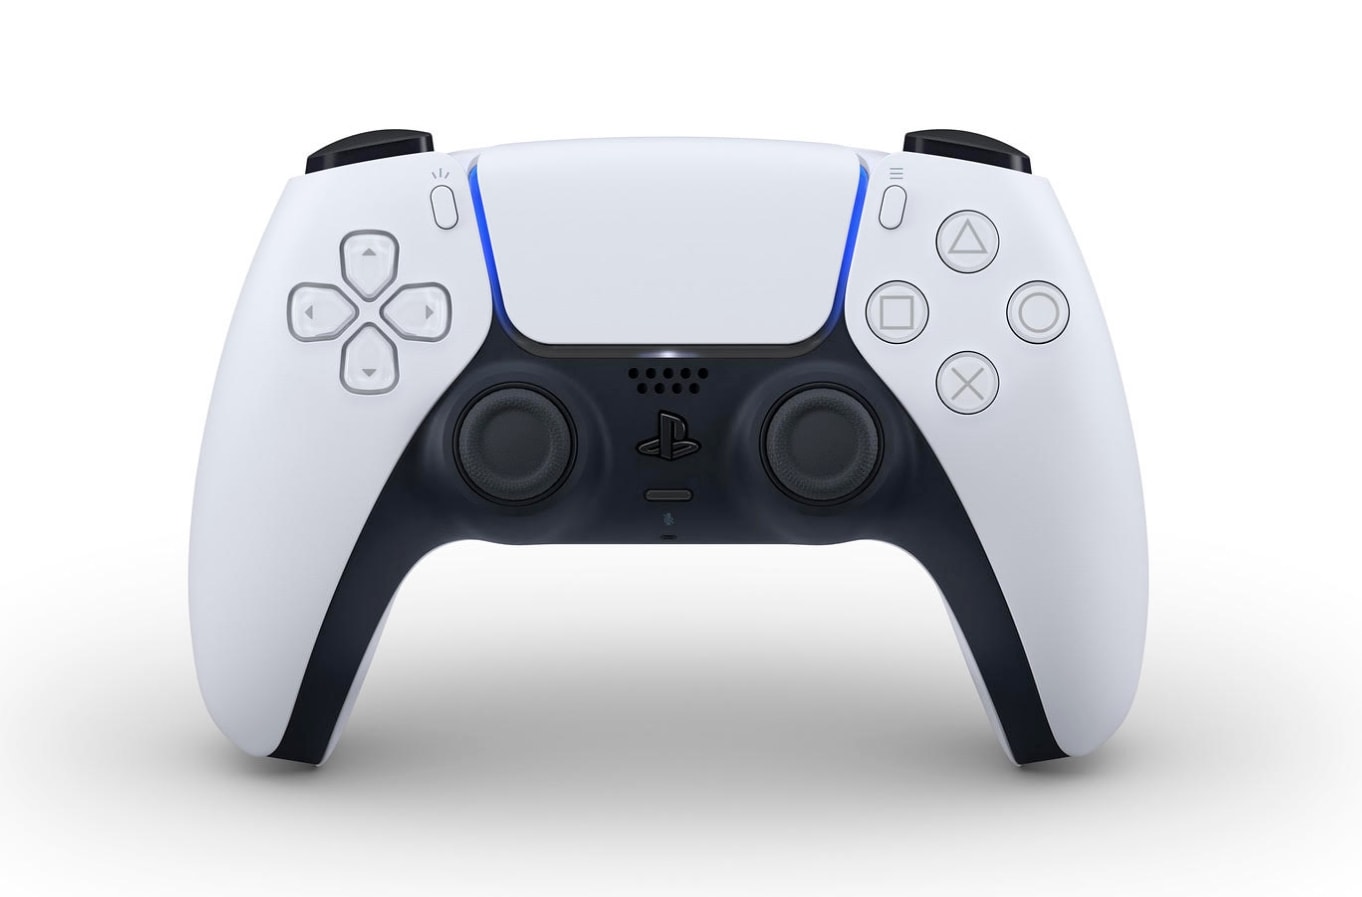 This is what PlayStation 5 Controller looks like